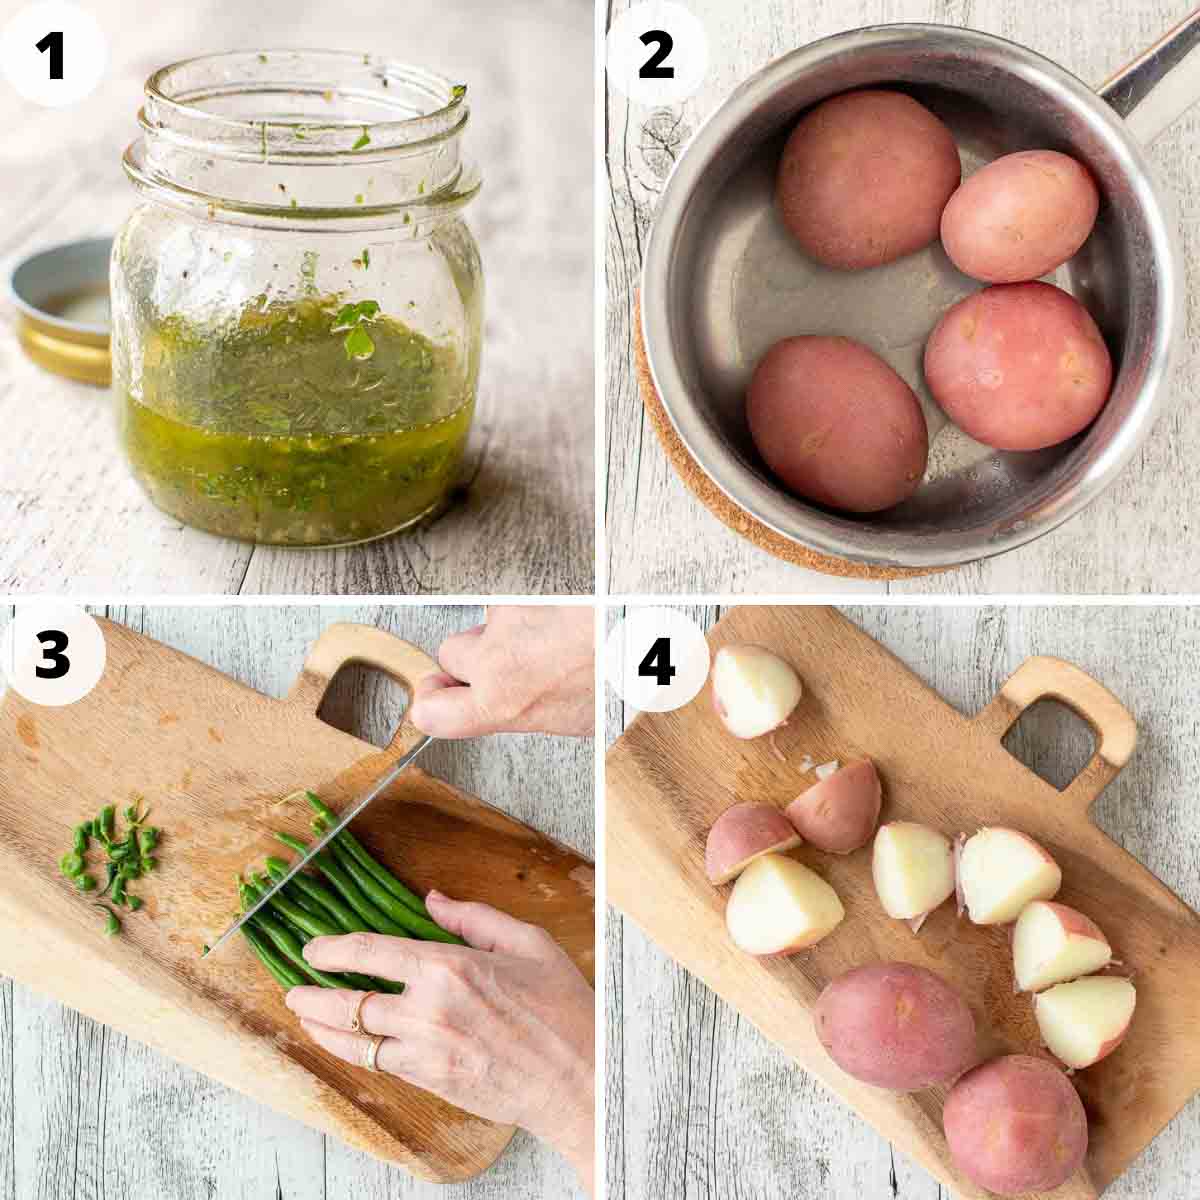 Four step process showing how to make this green beans recipe.